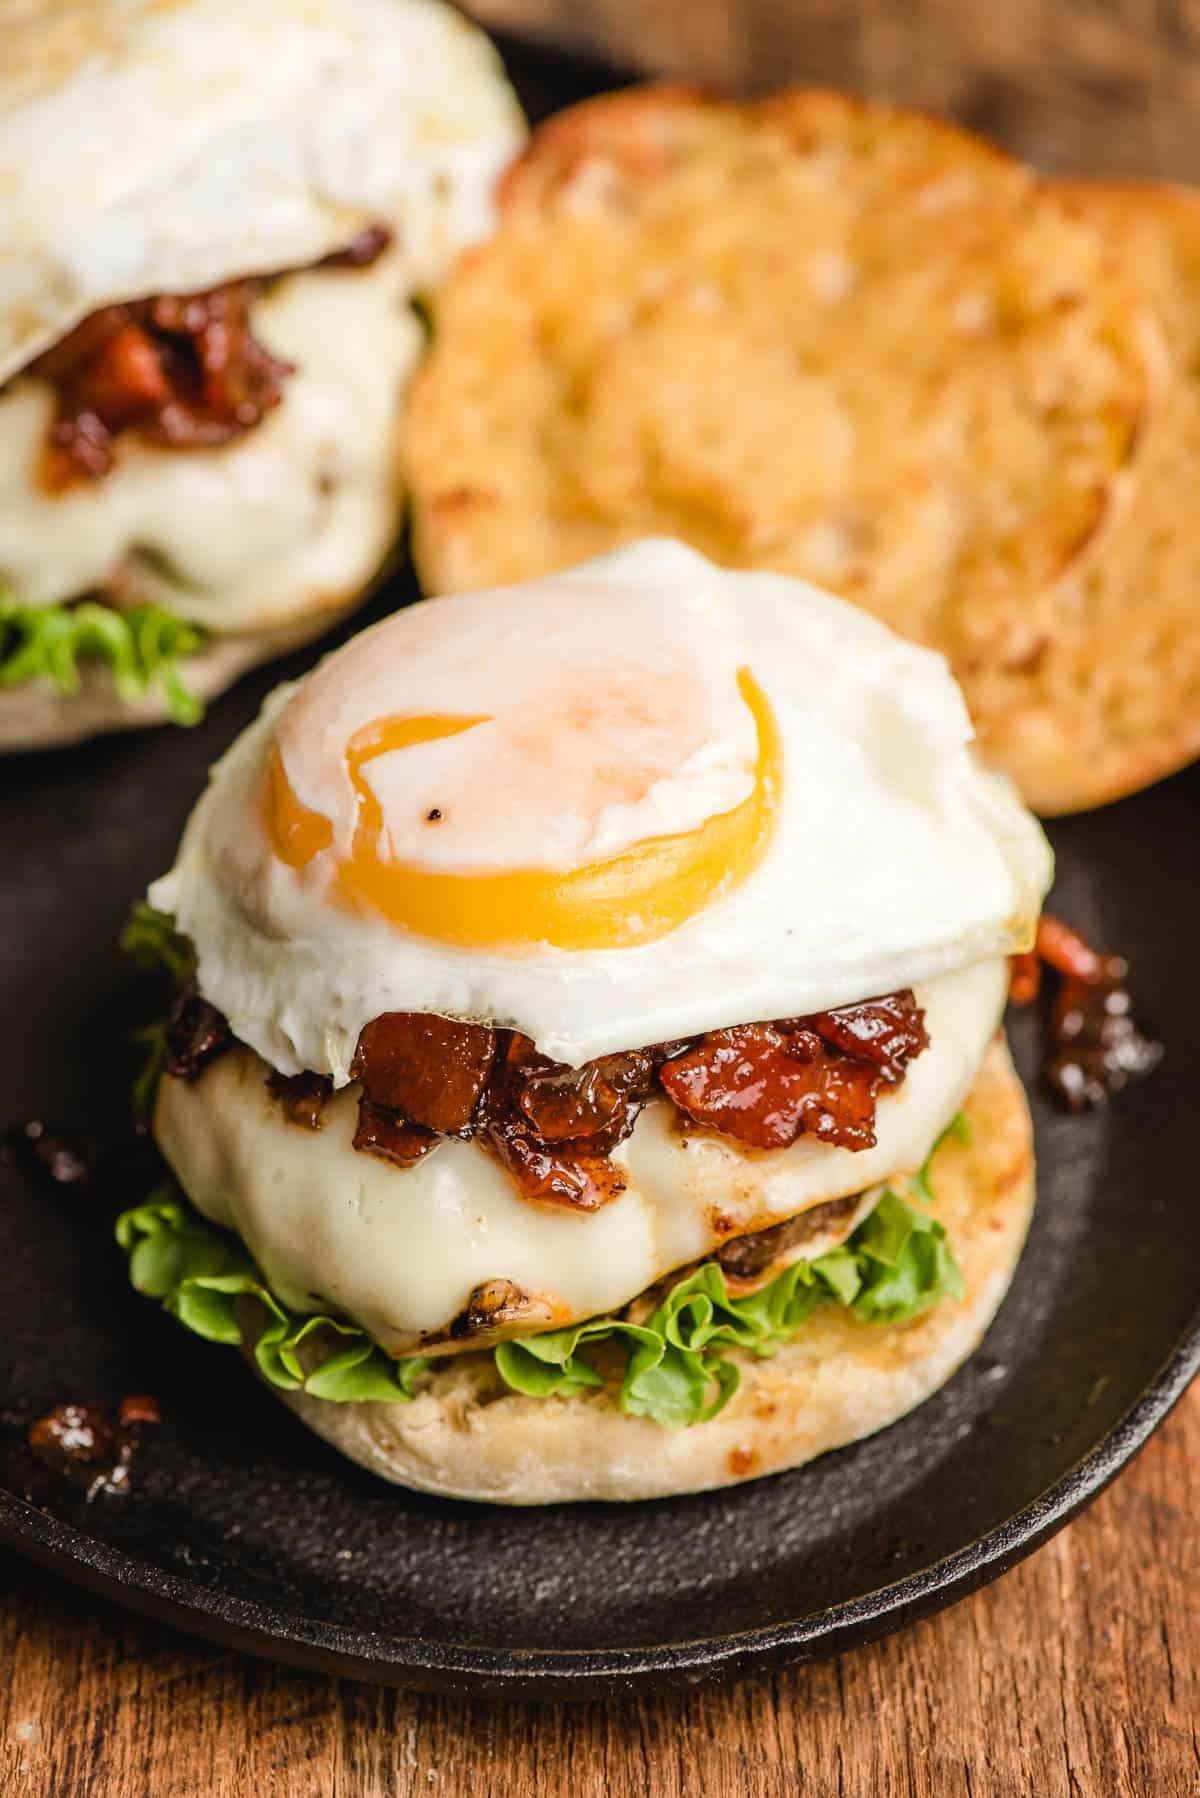 Fried egg burger with salary jam and lettuce on an English muffin.